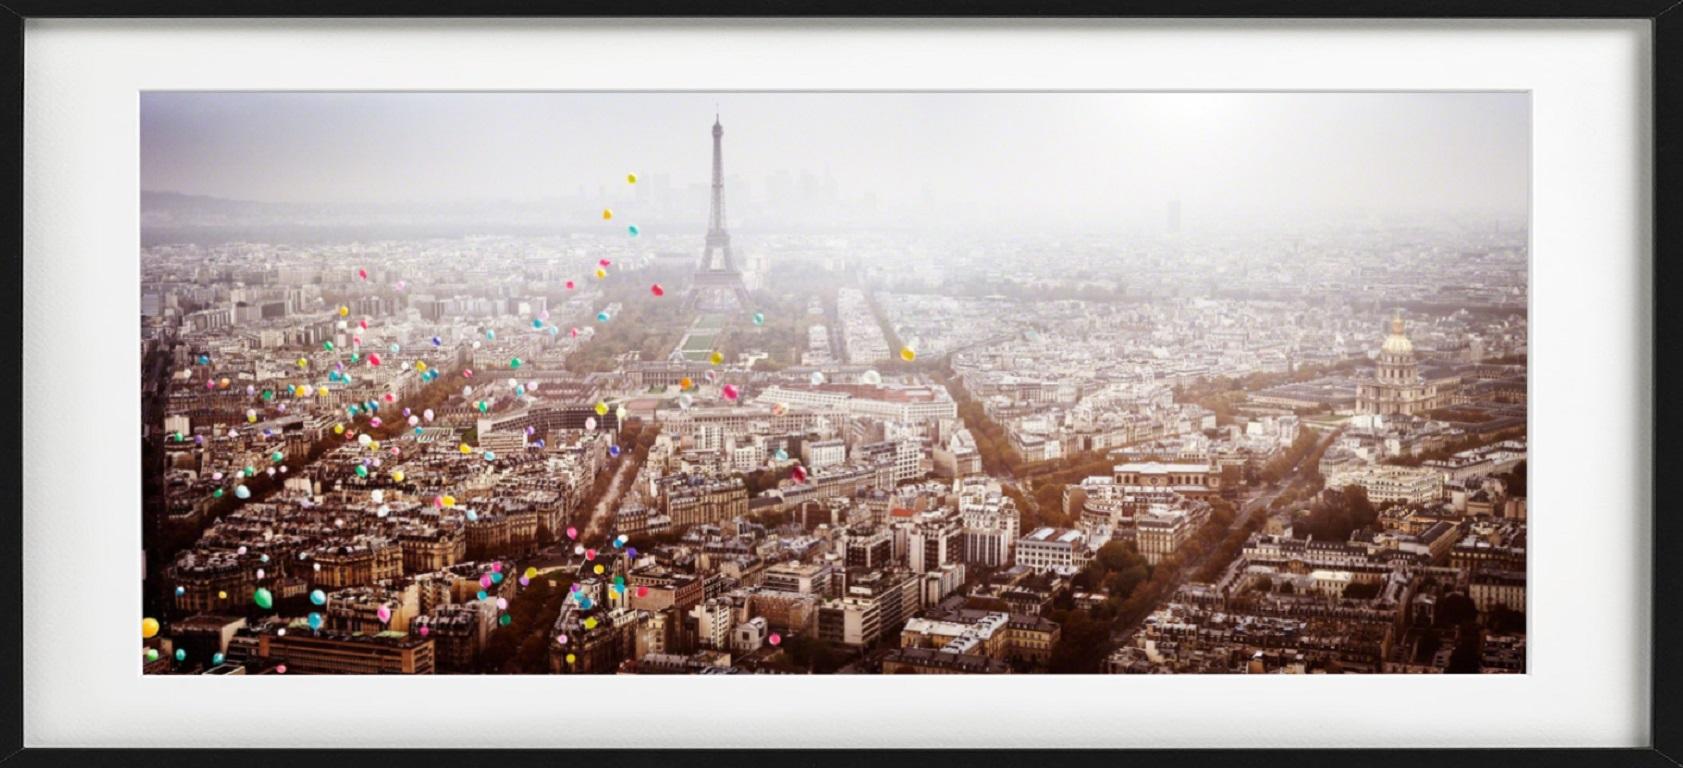 Balloons over Paris (France) - aerial view of Paris with Eiffel Tower balloons  - Gray Color Photograph by David Drebin